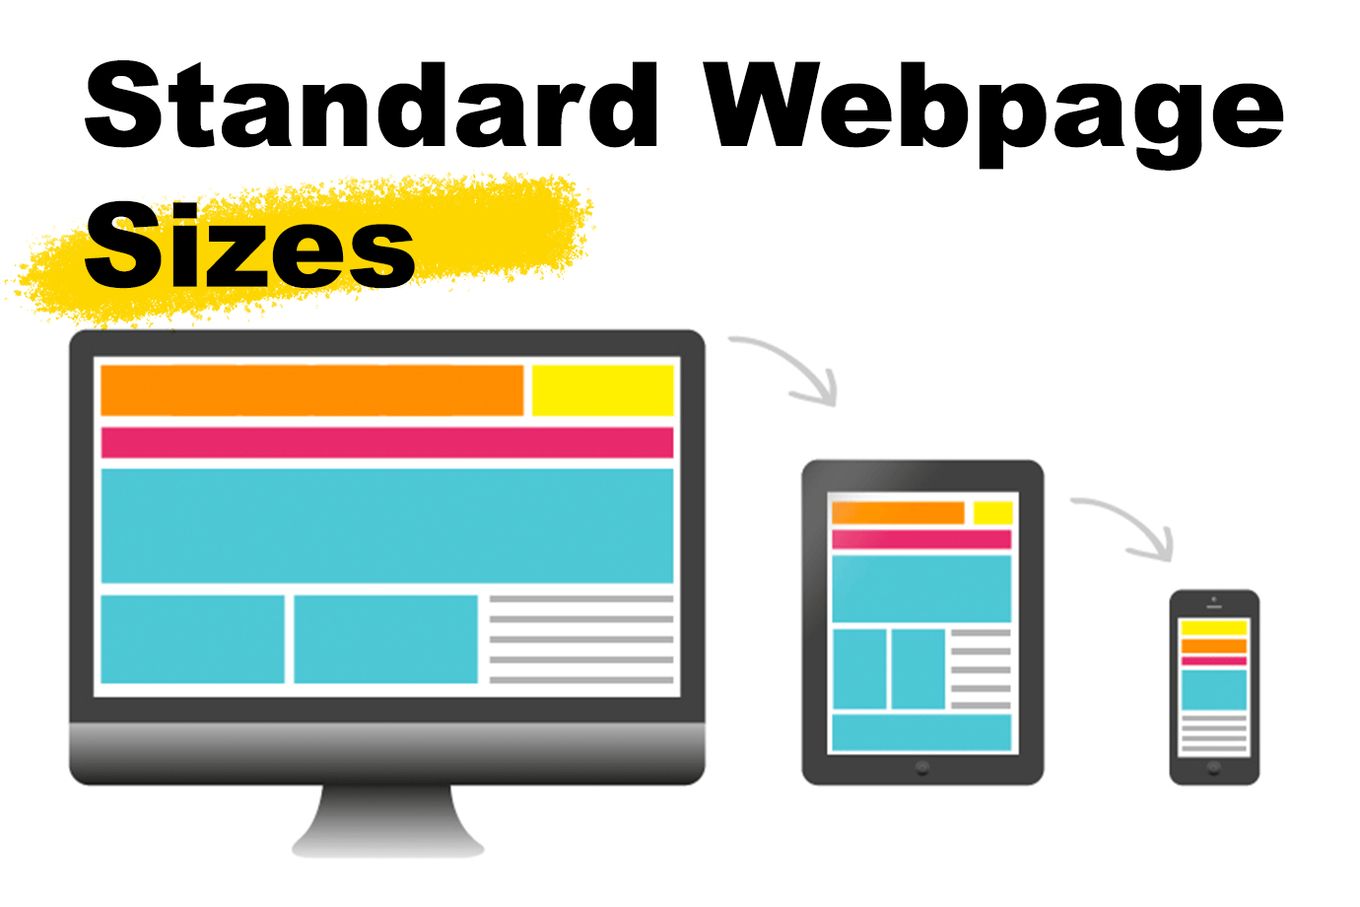 Standard Webpage Sizes - Responsive Dimensions